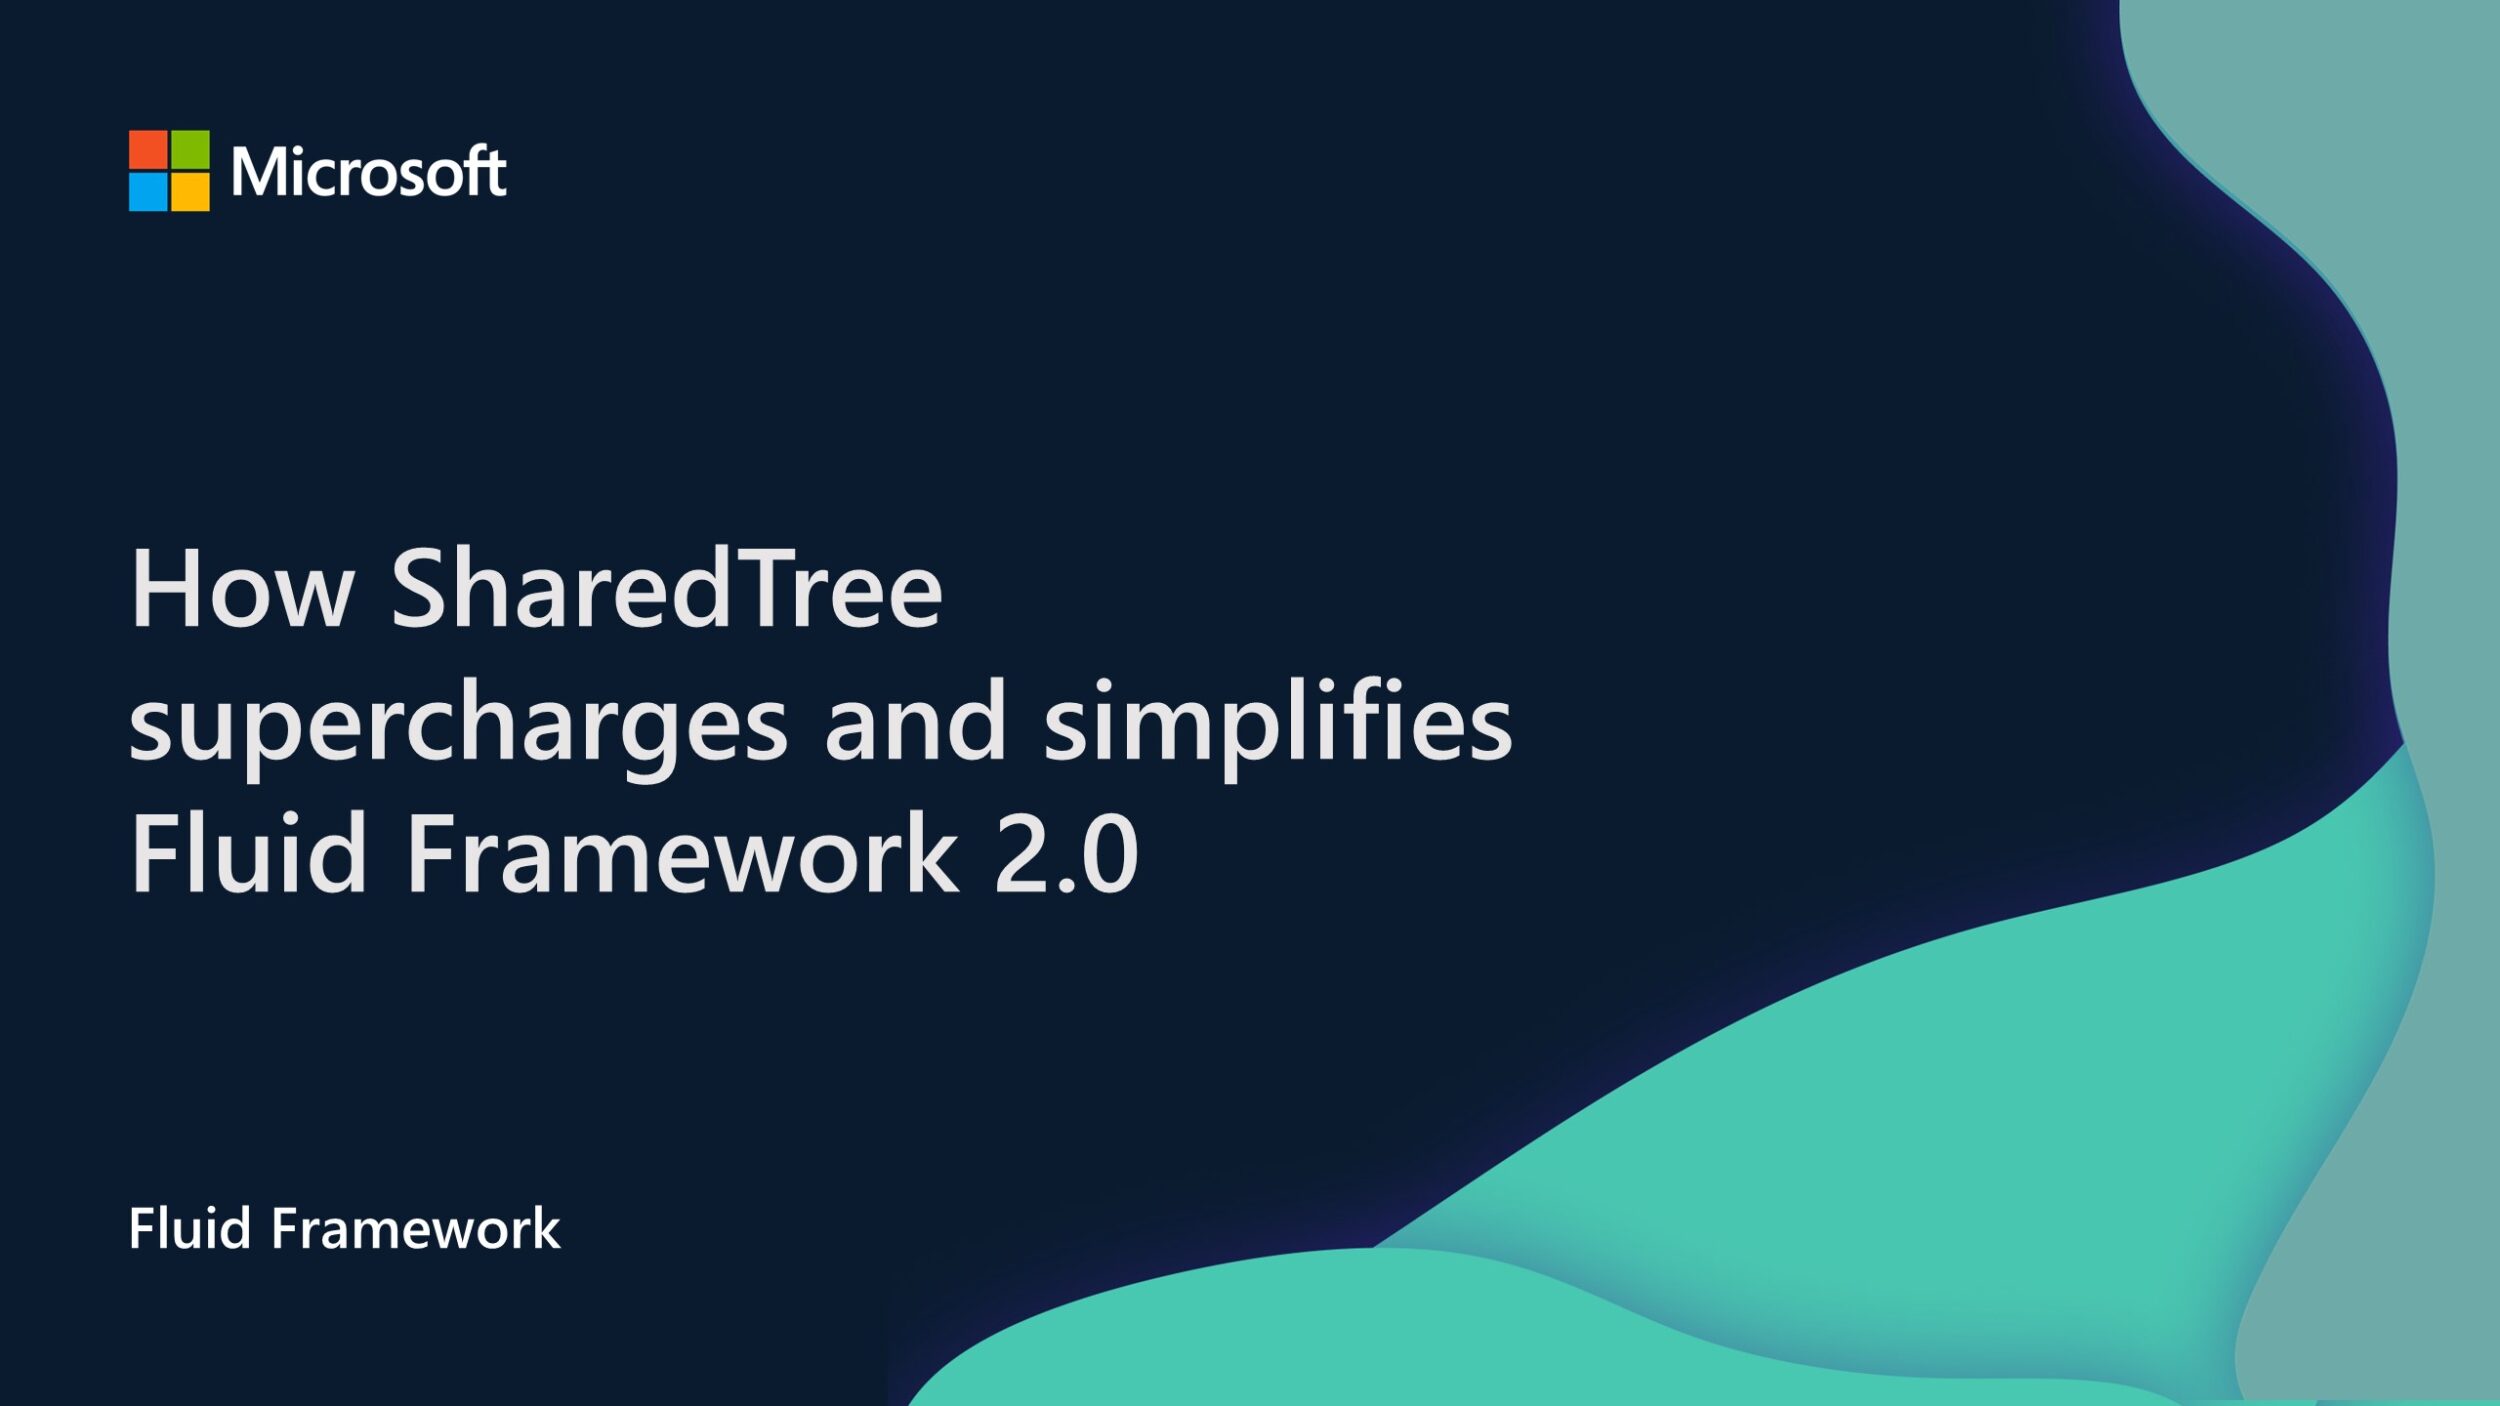 How SharedTree supercharges and simplifies Fluid Framework 2.0